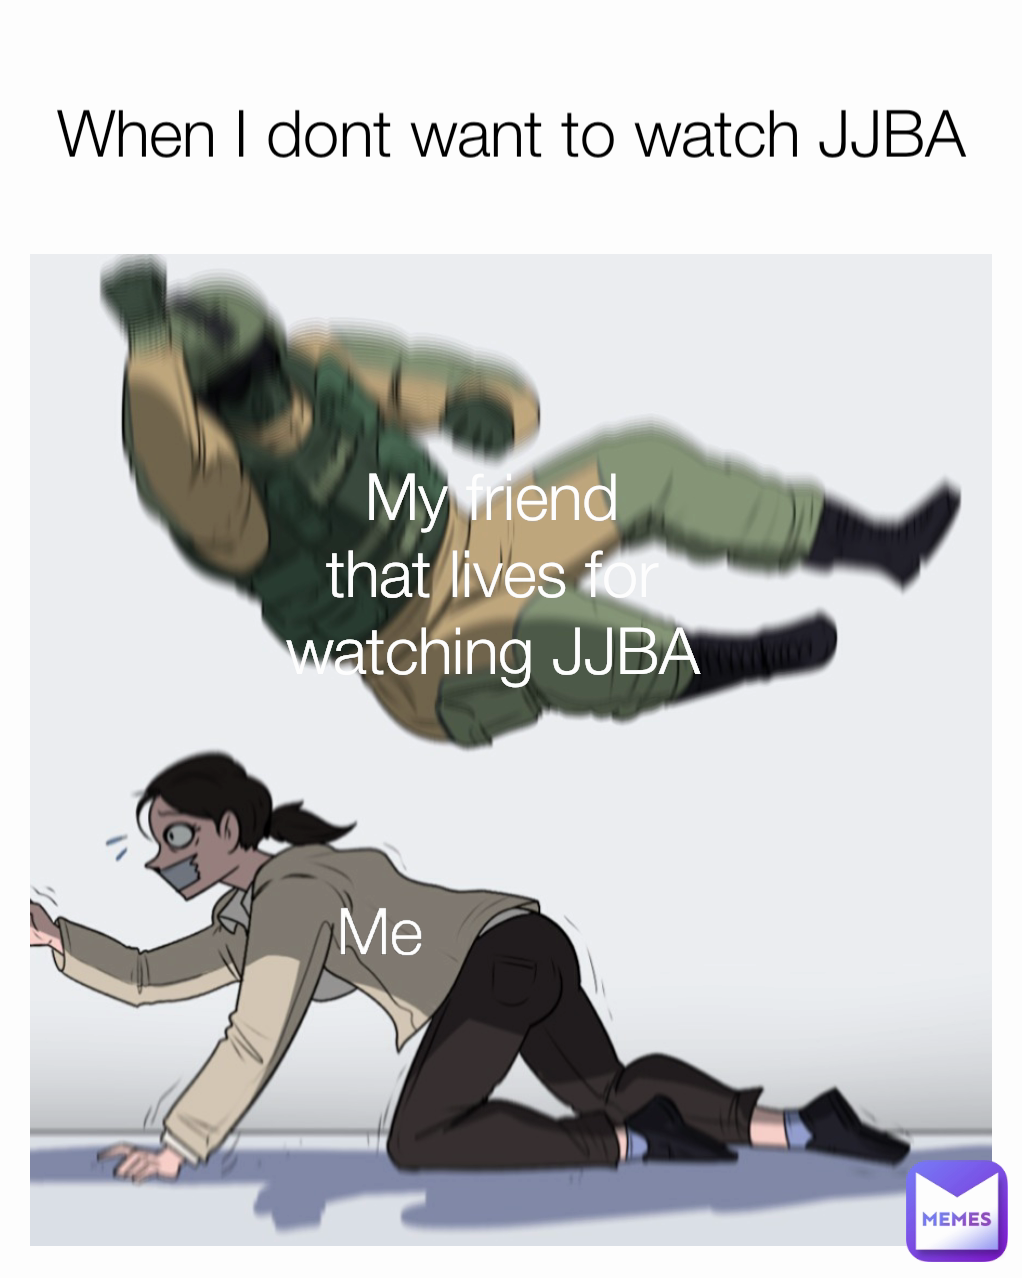 When I dont want to watch JJBA My friend that lives for watching JJBA Me